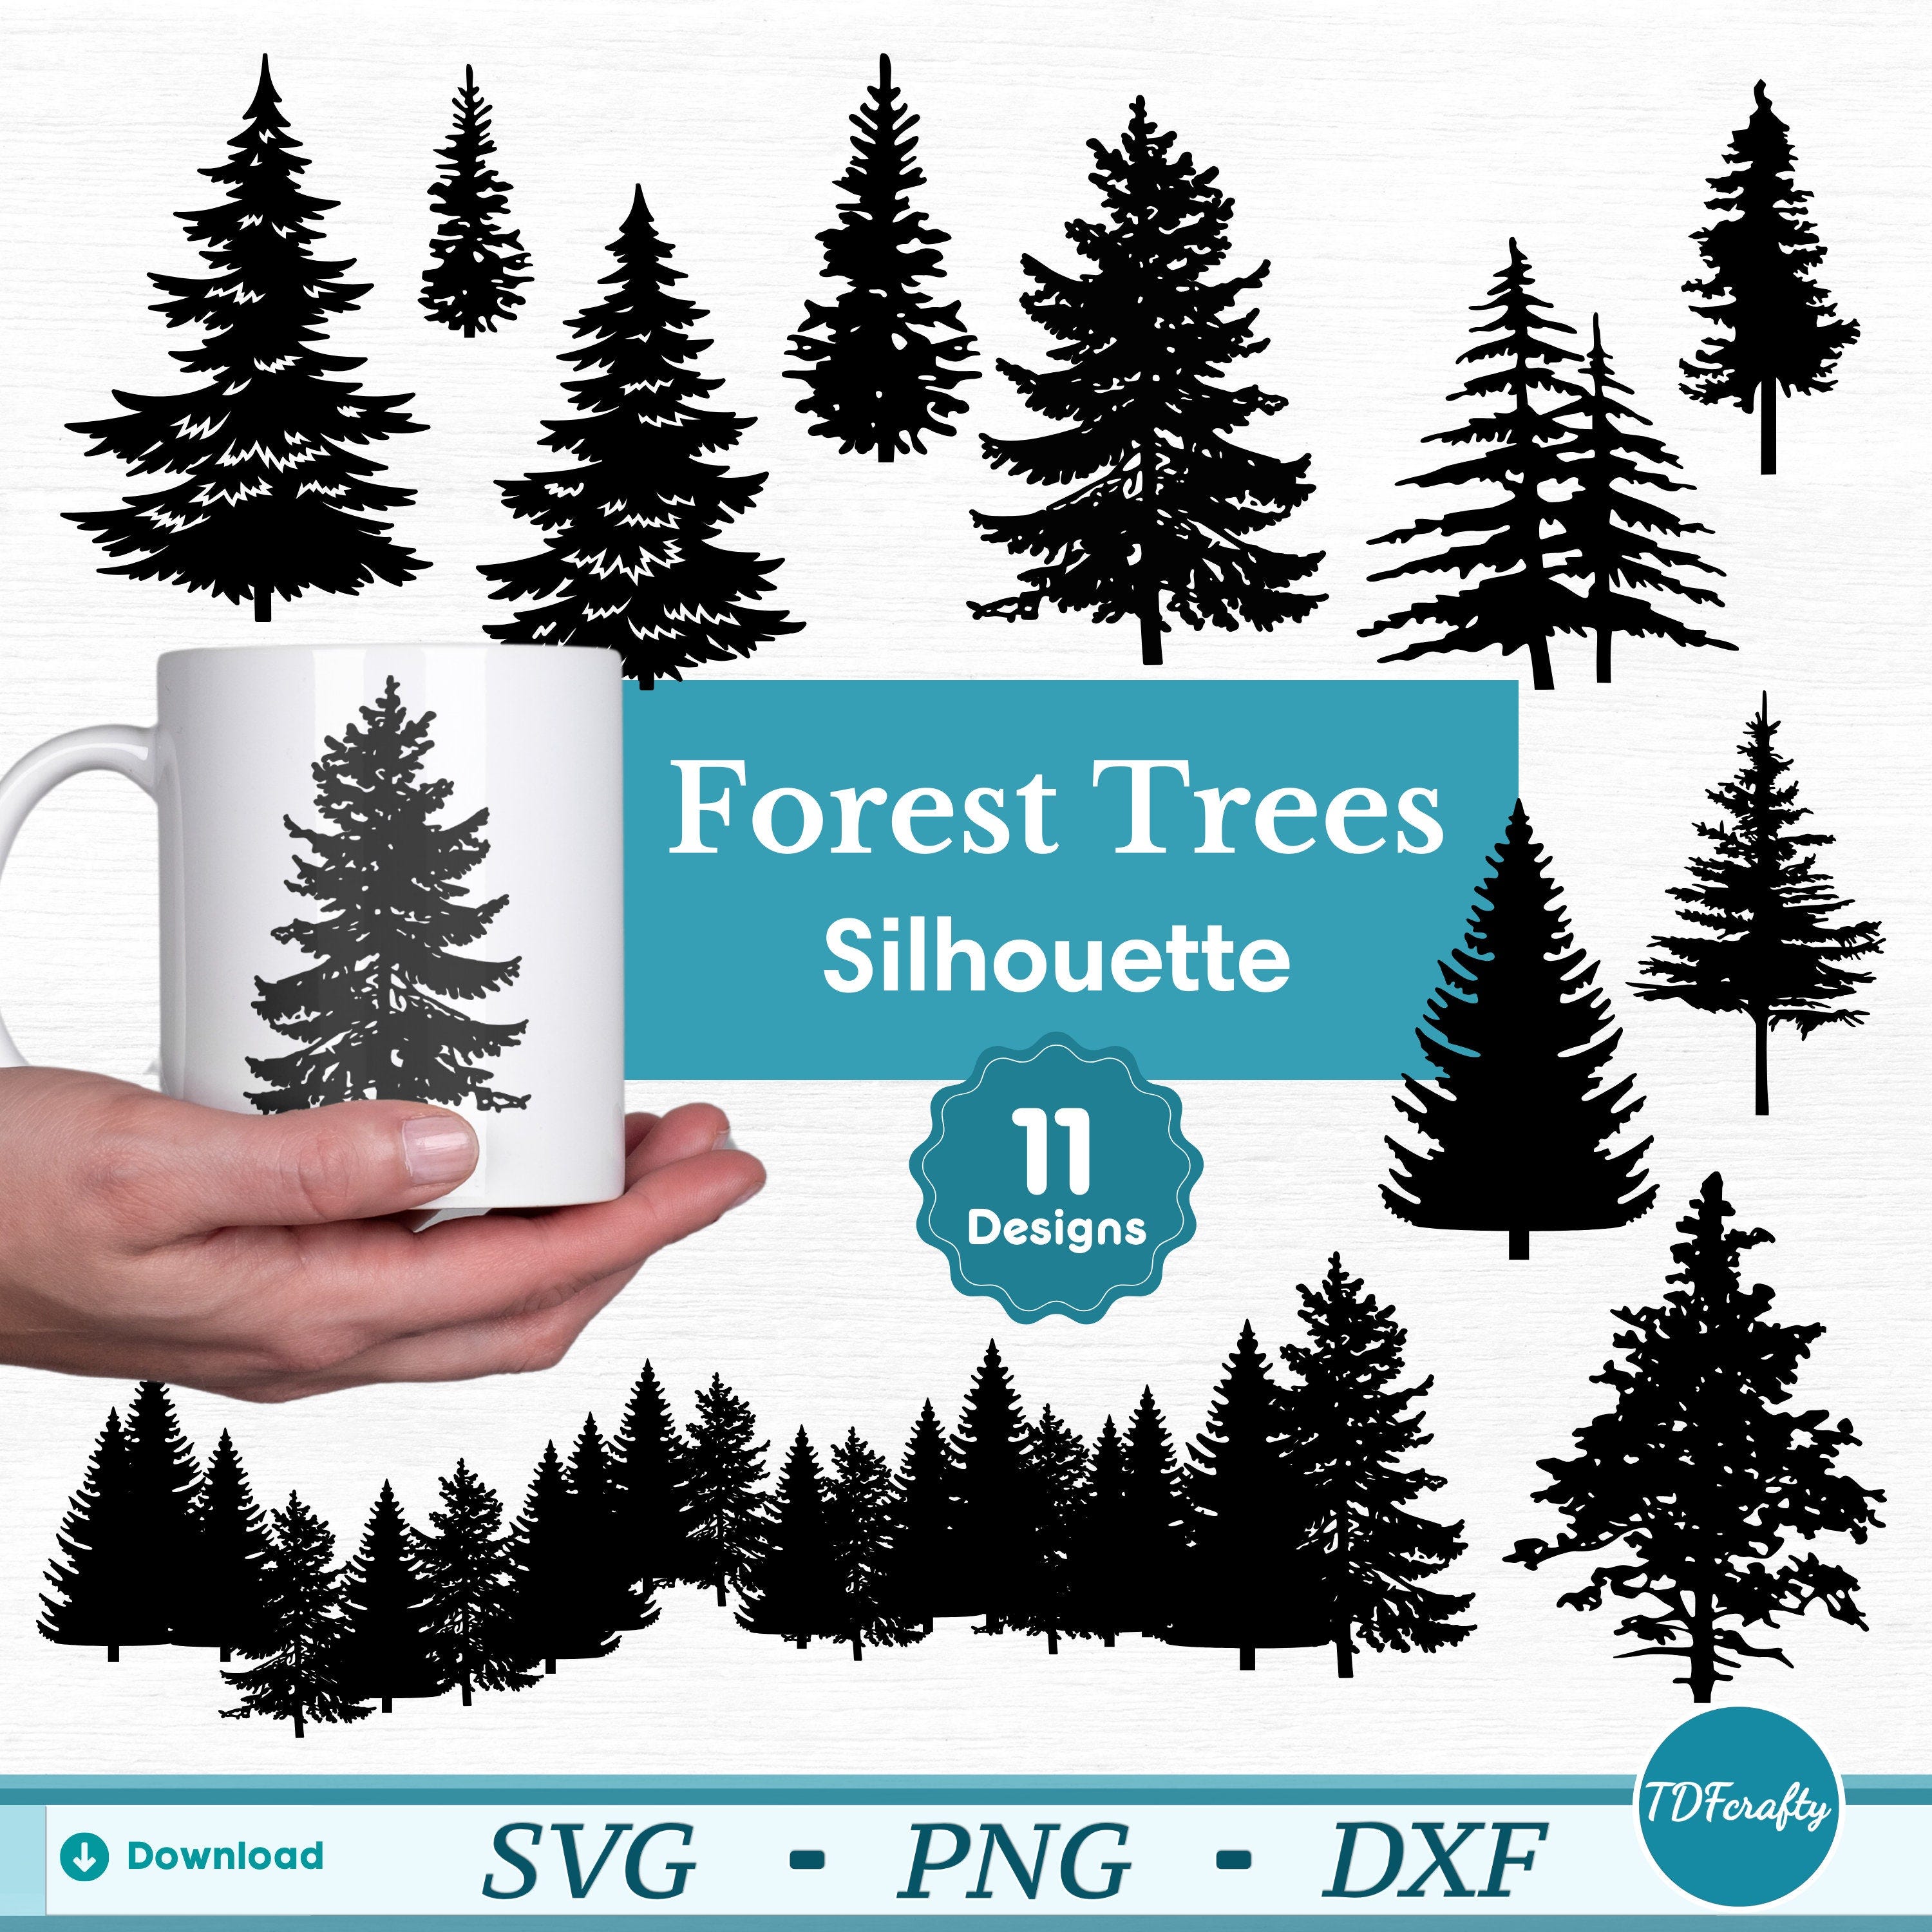 Forest Trees Silhouette Bundle svg, Pine Tree png, Printable Autumn Tree Shapes pdf, Foliage Cutting File dxf, eps Laser Machine